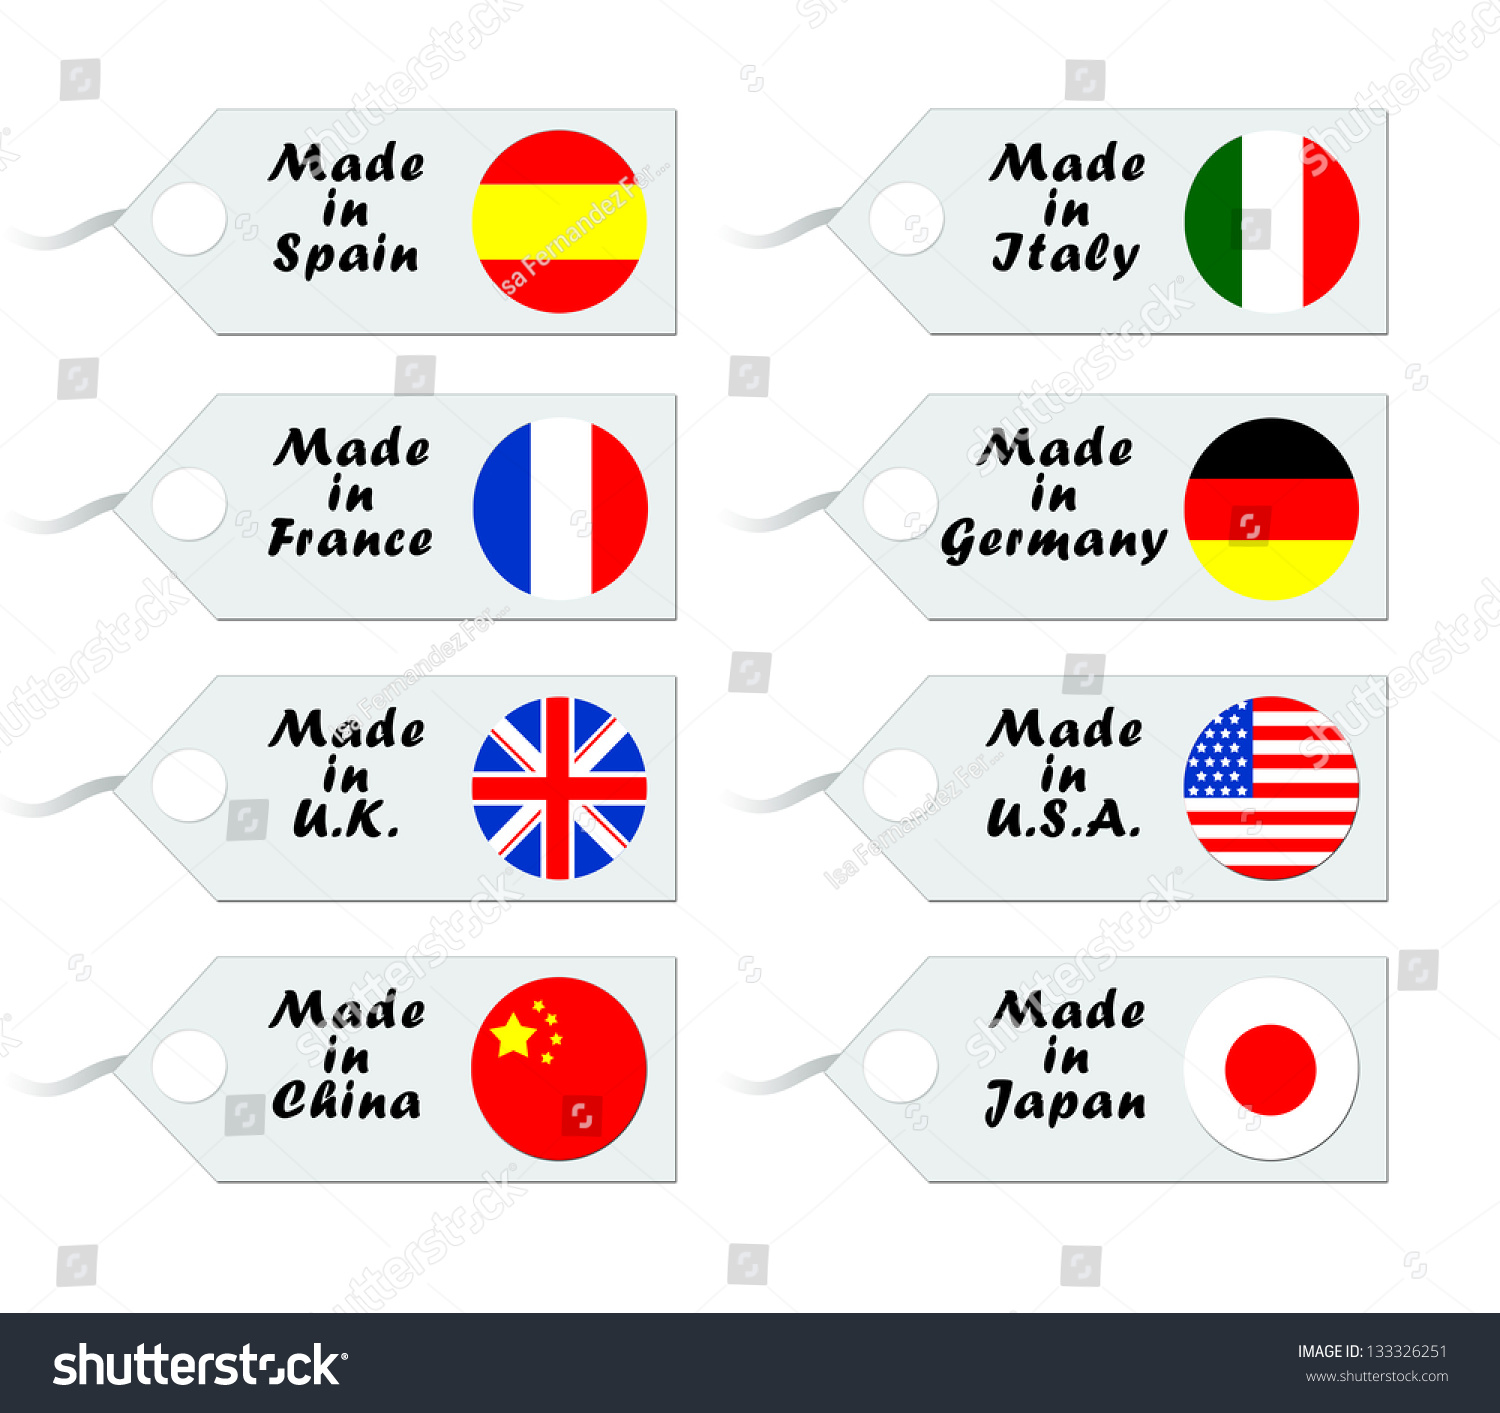 Tags for purchase with flags of different countries #133326251